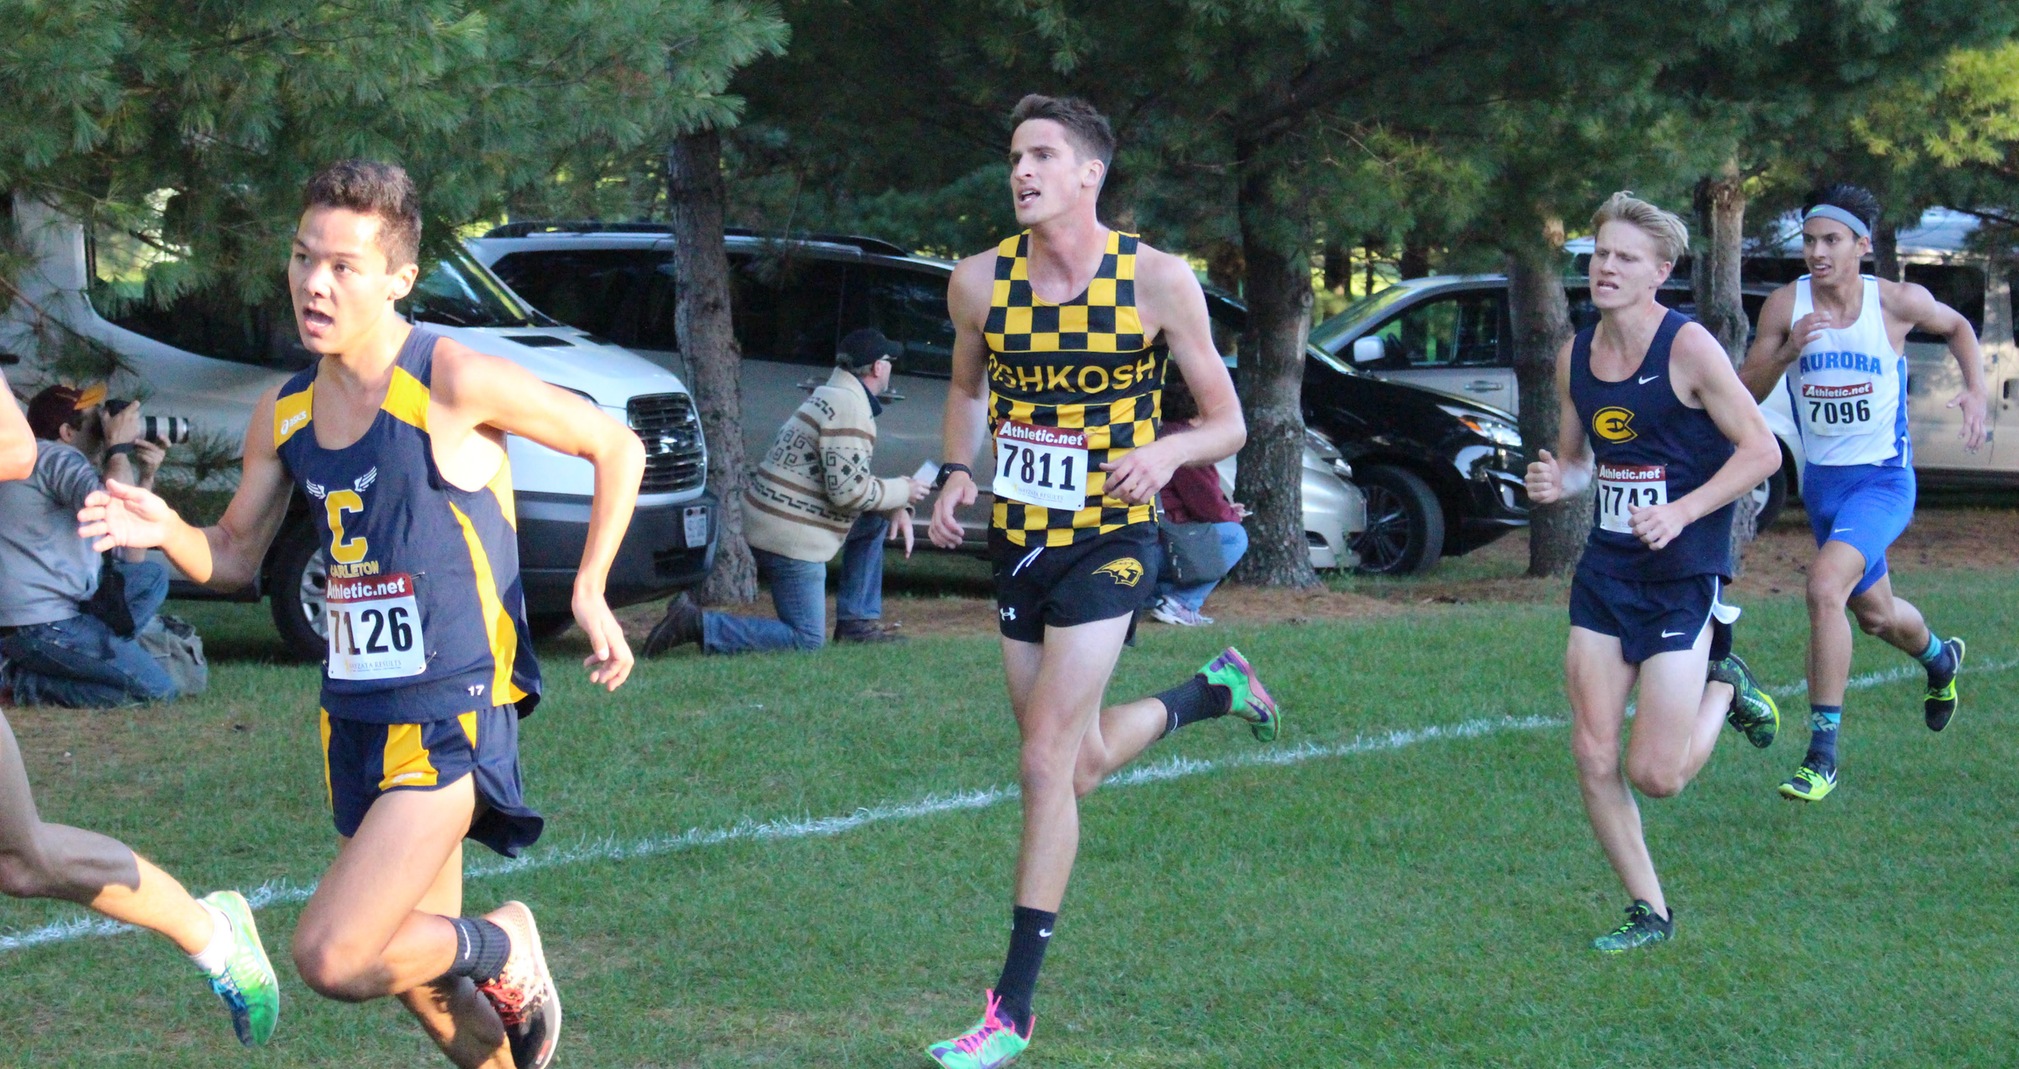 Justin Skinkis led the Titans by finishing 67th among meet's 438 runners.